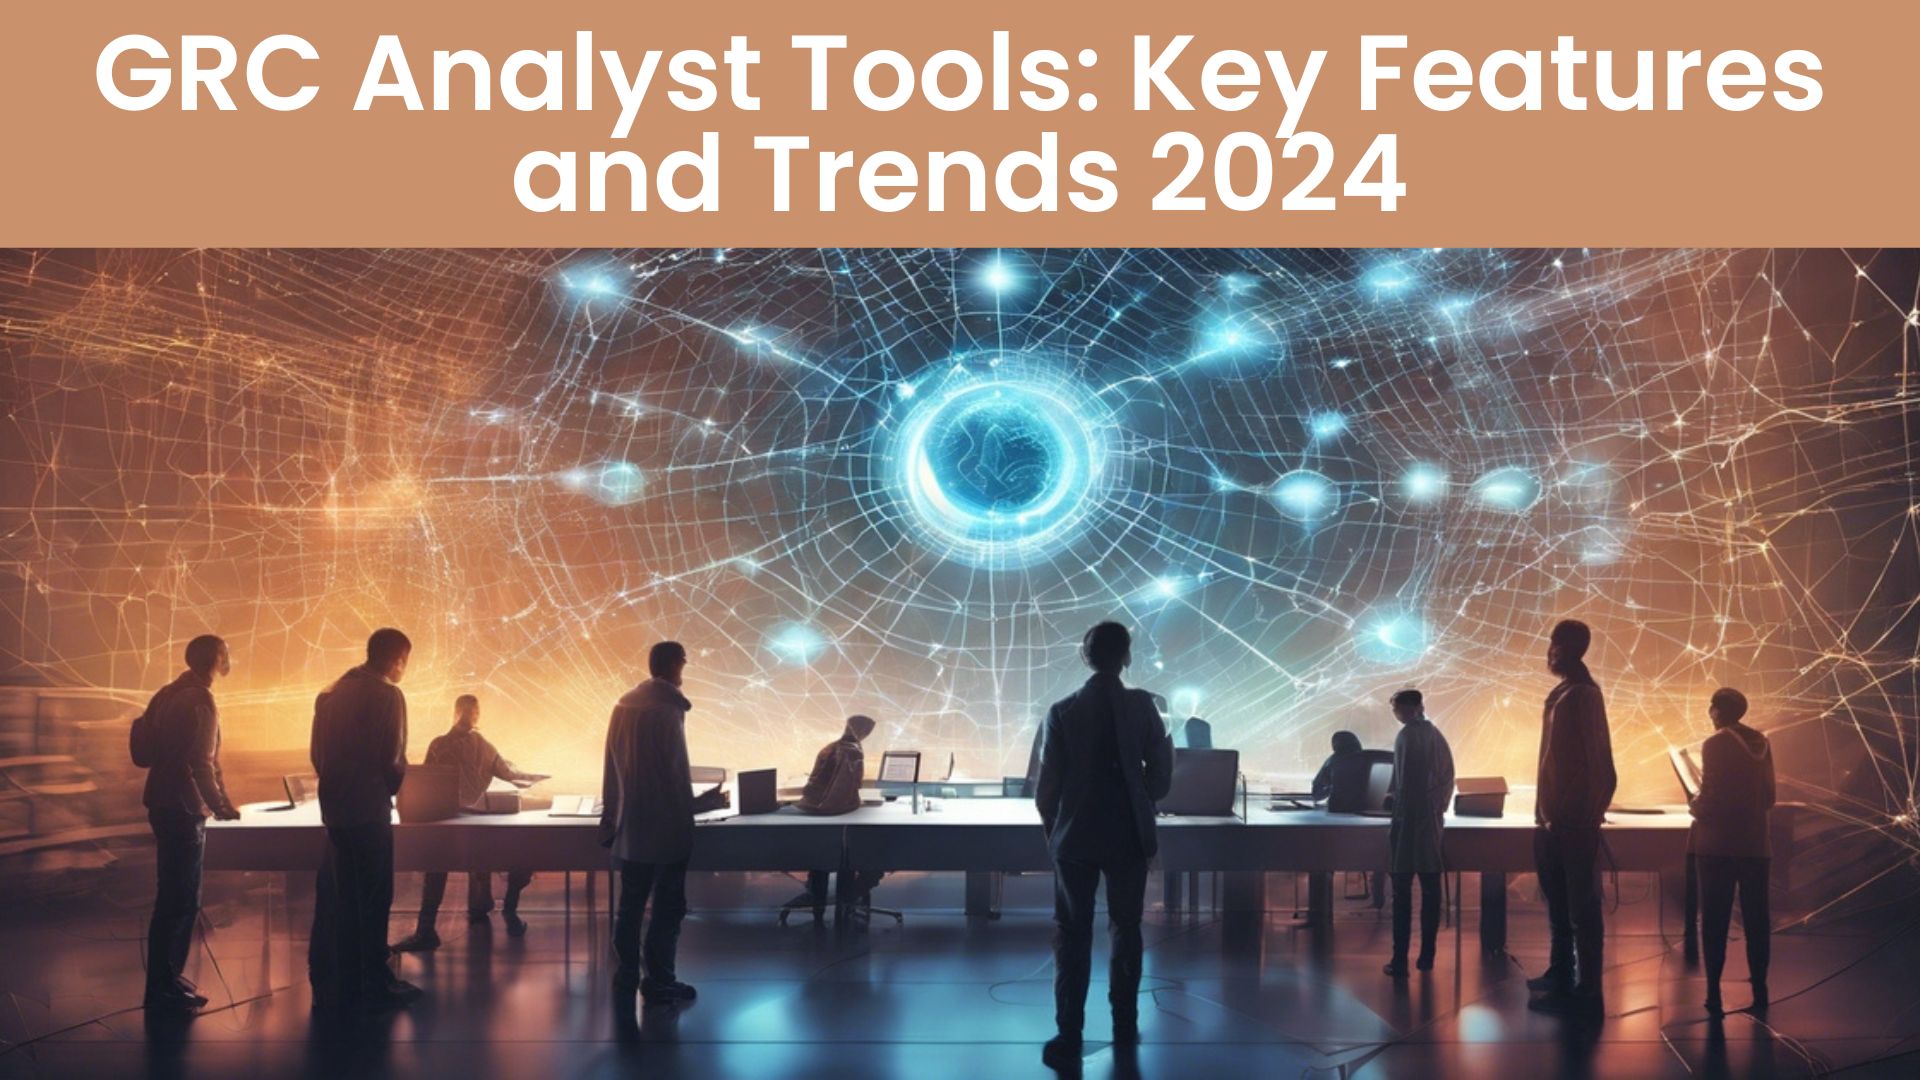 GRC Analyst Tools Key Features and Trends 2024